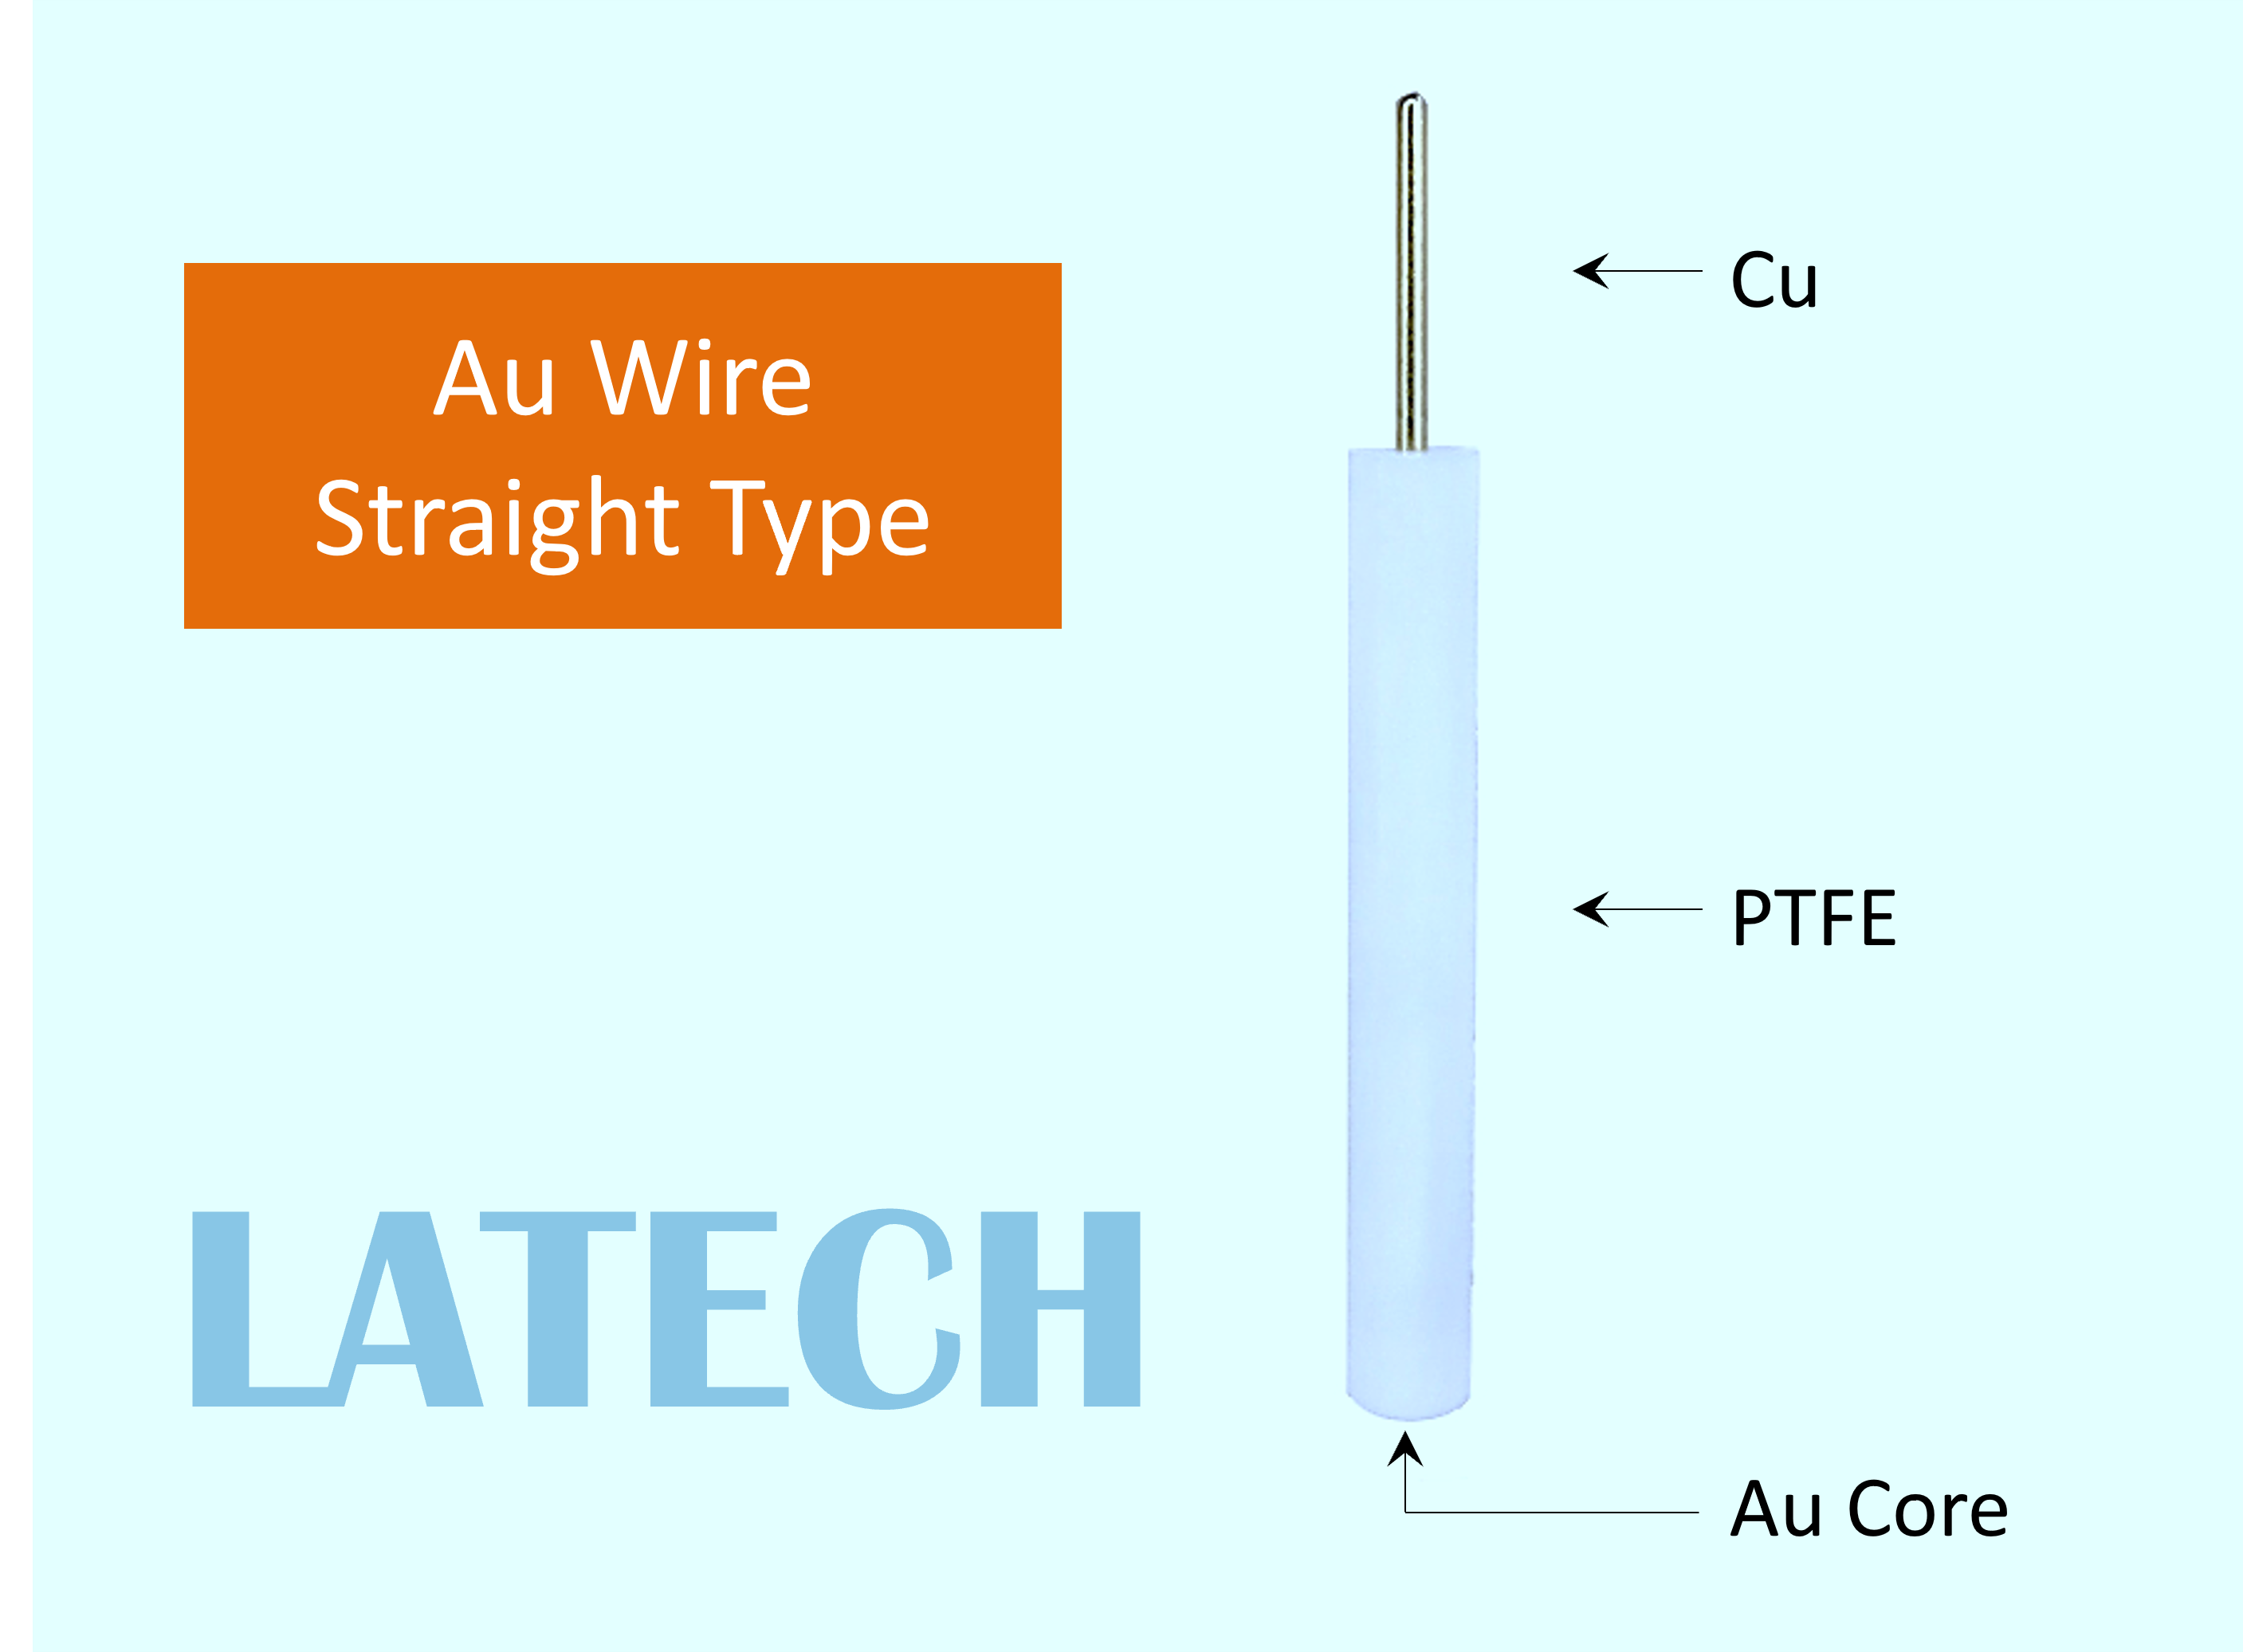 Au wire Straight Type Latech.png